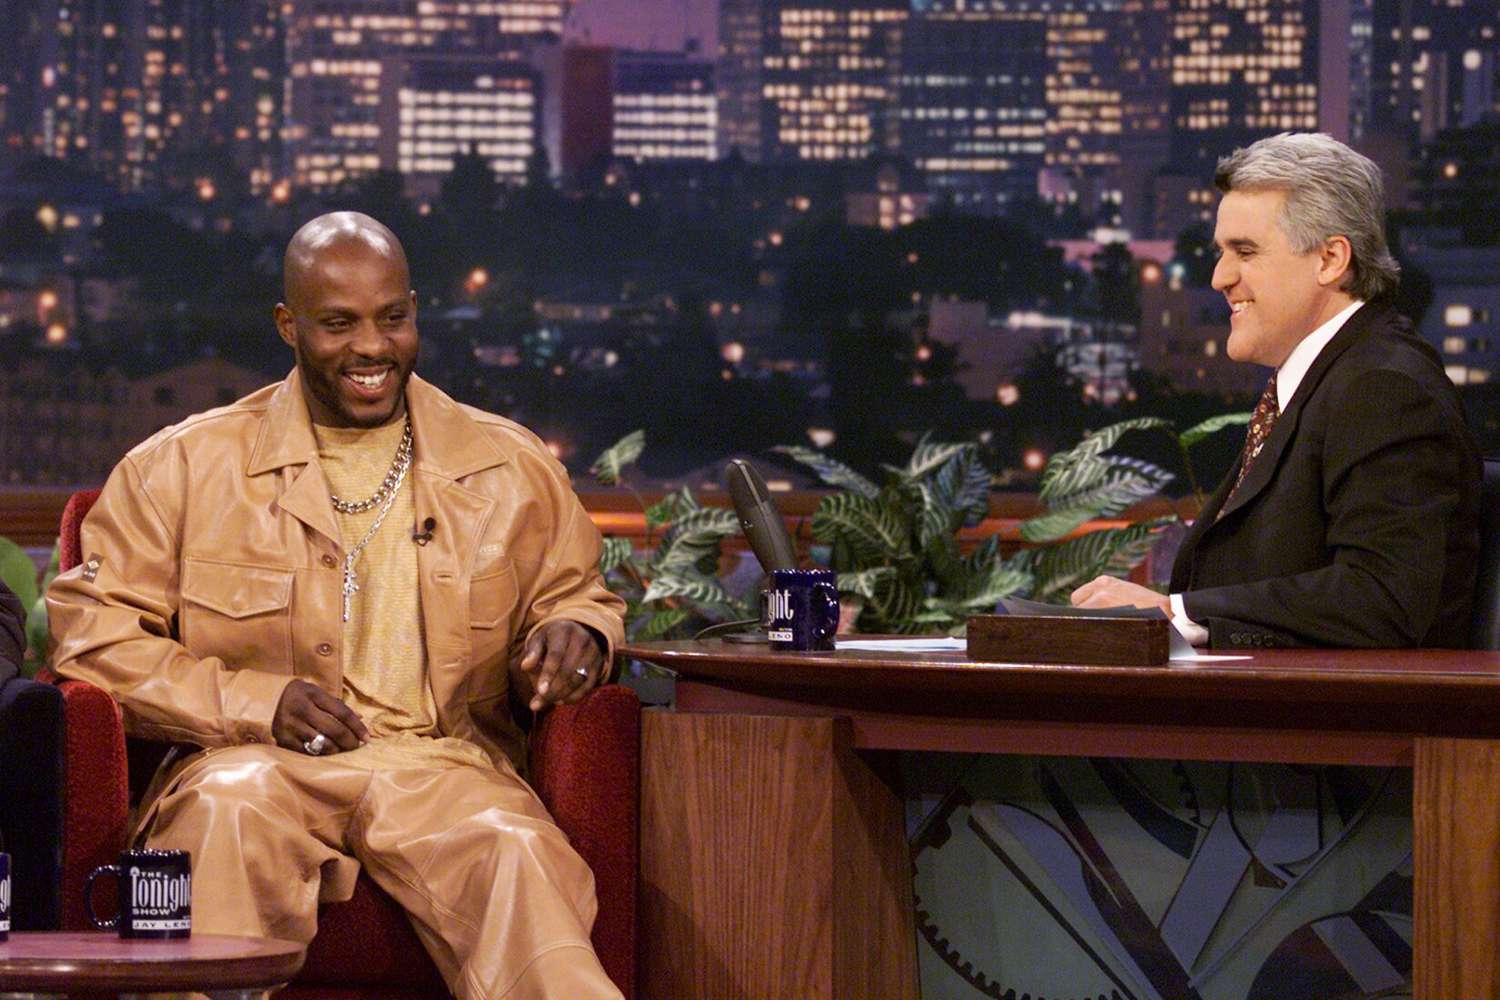 DMX during an interview with host Jay Leno on March 13, 2001